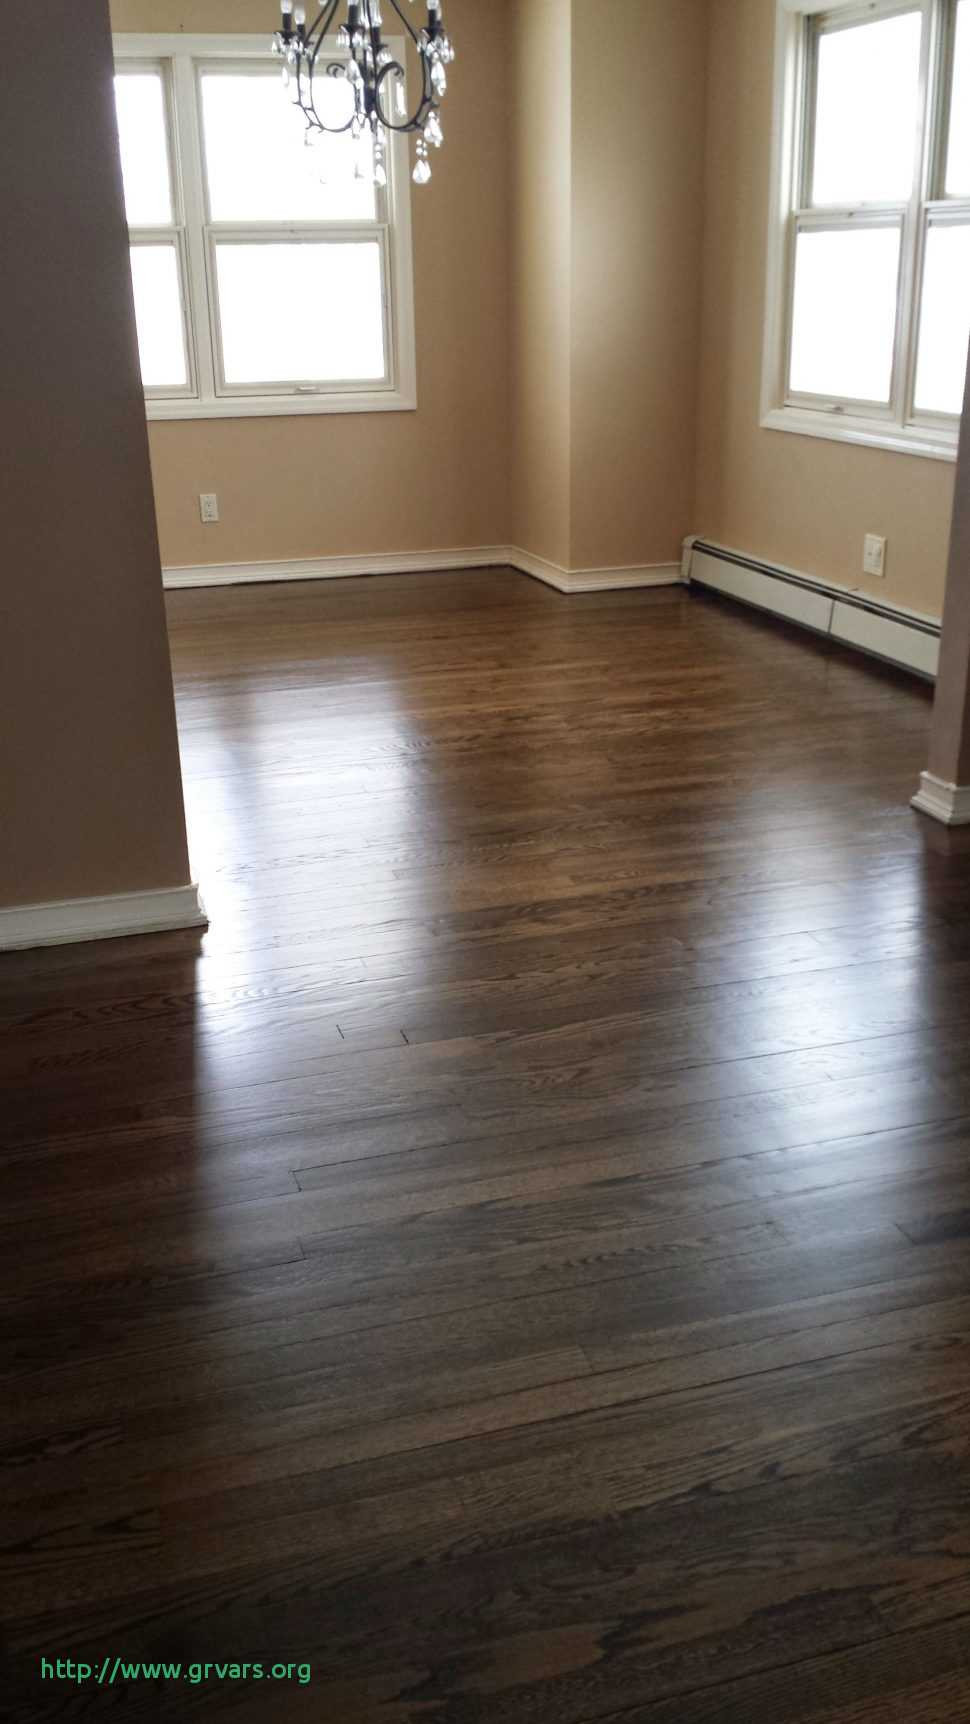 28 attractive Walnut Hardwood Flooring Cost 2024 free download walnut hardwood flooring cost of 21 nouveau how much does it cost to have hardwood floors refinished pertaining to interior amusing refinishingod floors diy network refinish parquet without 